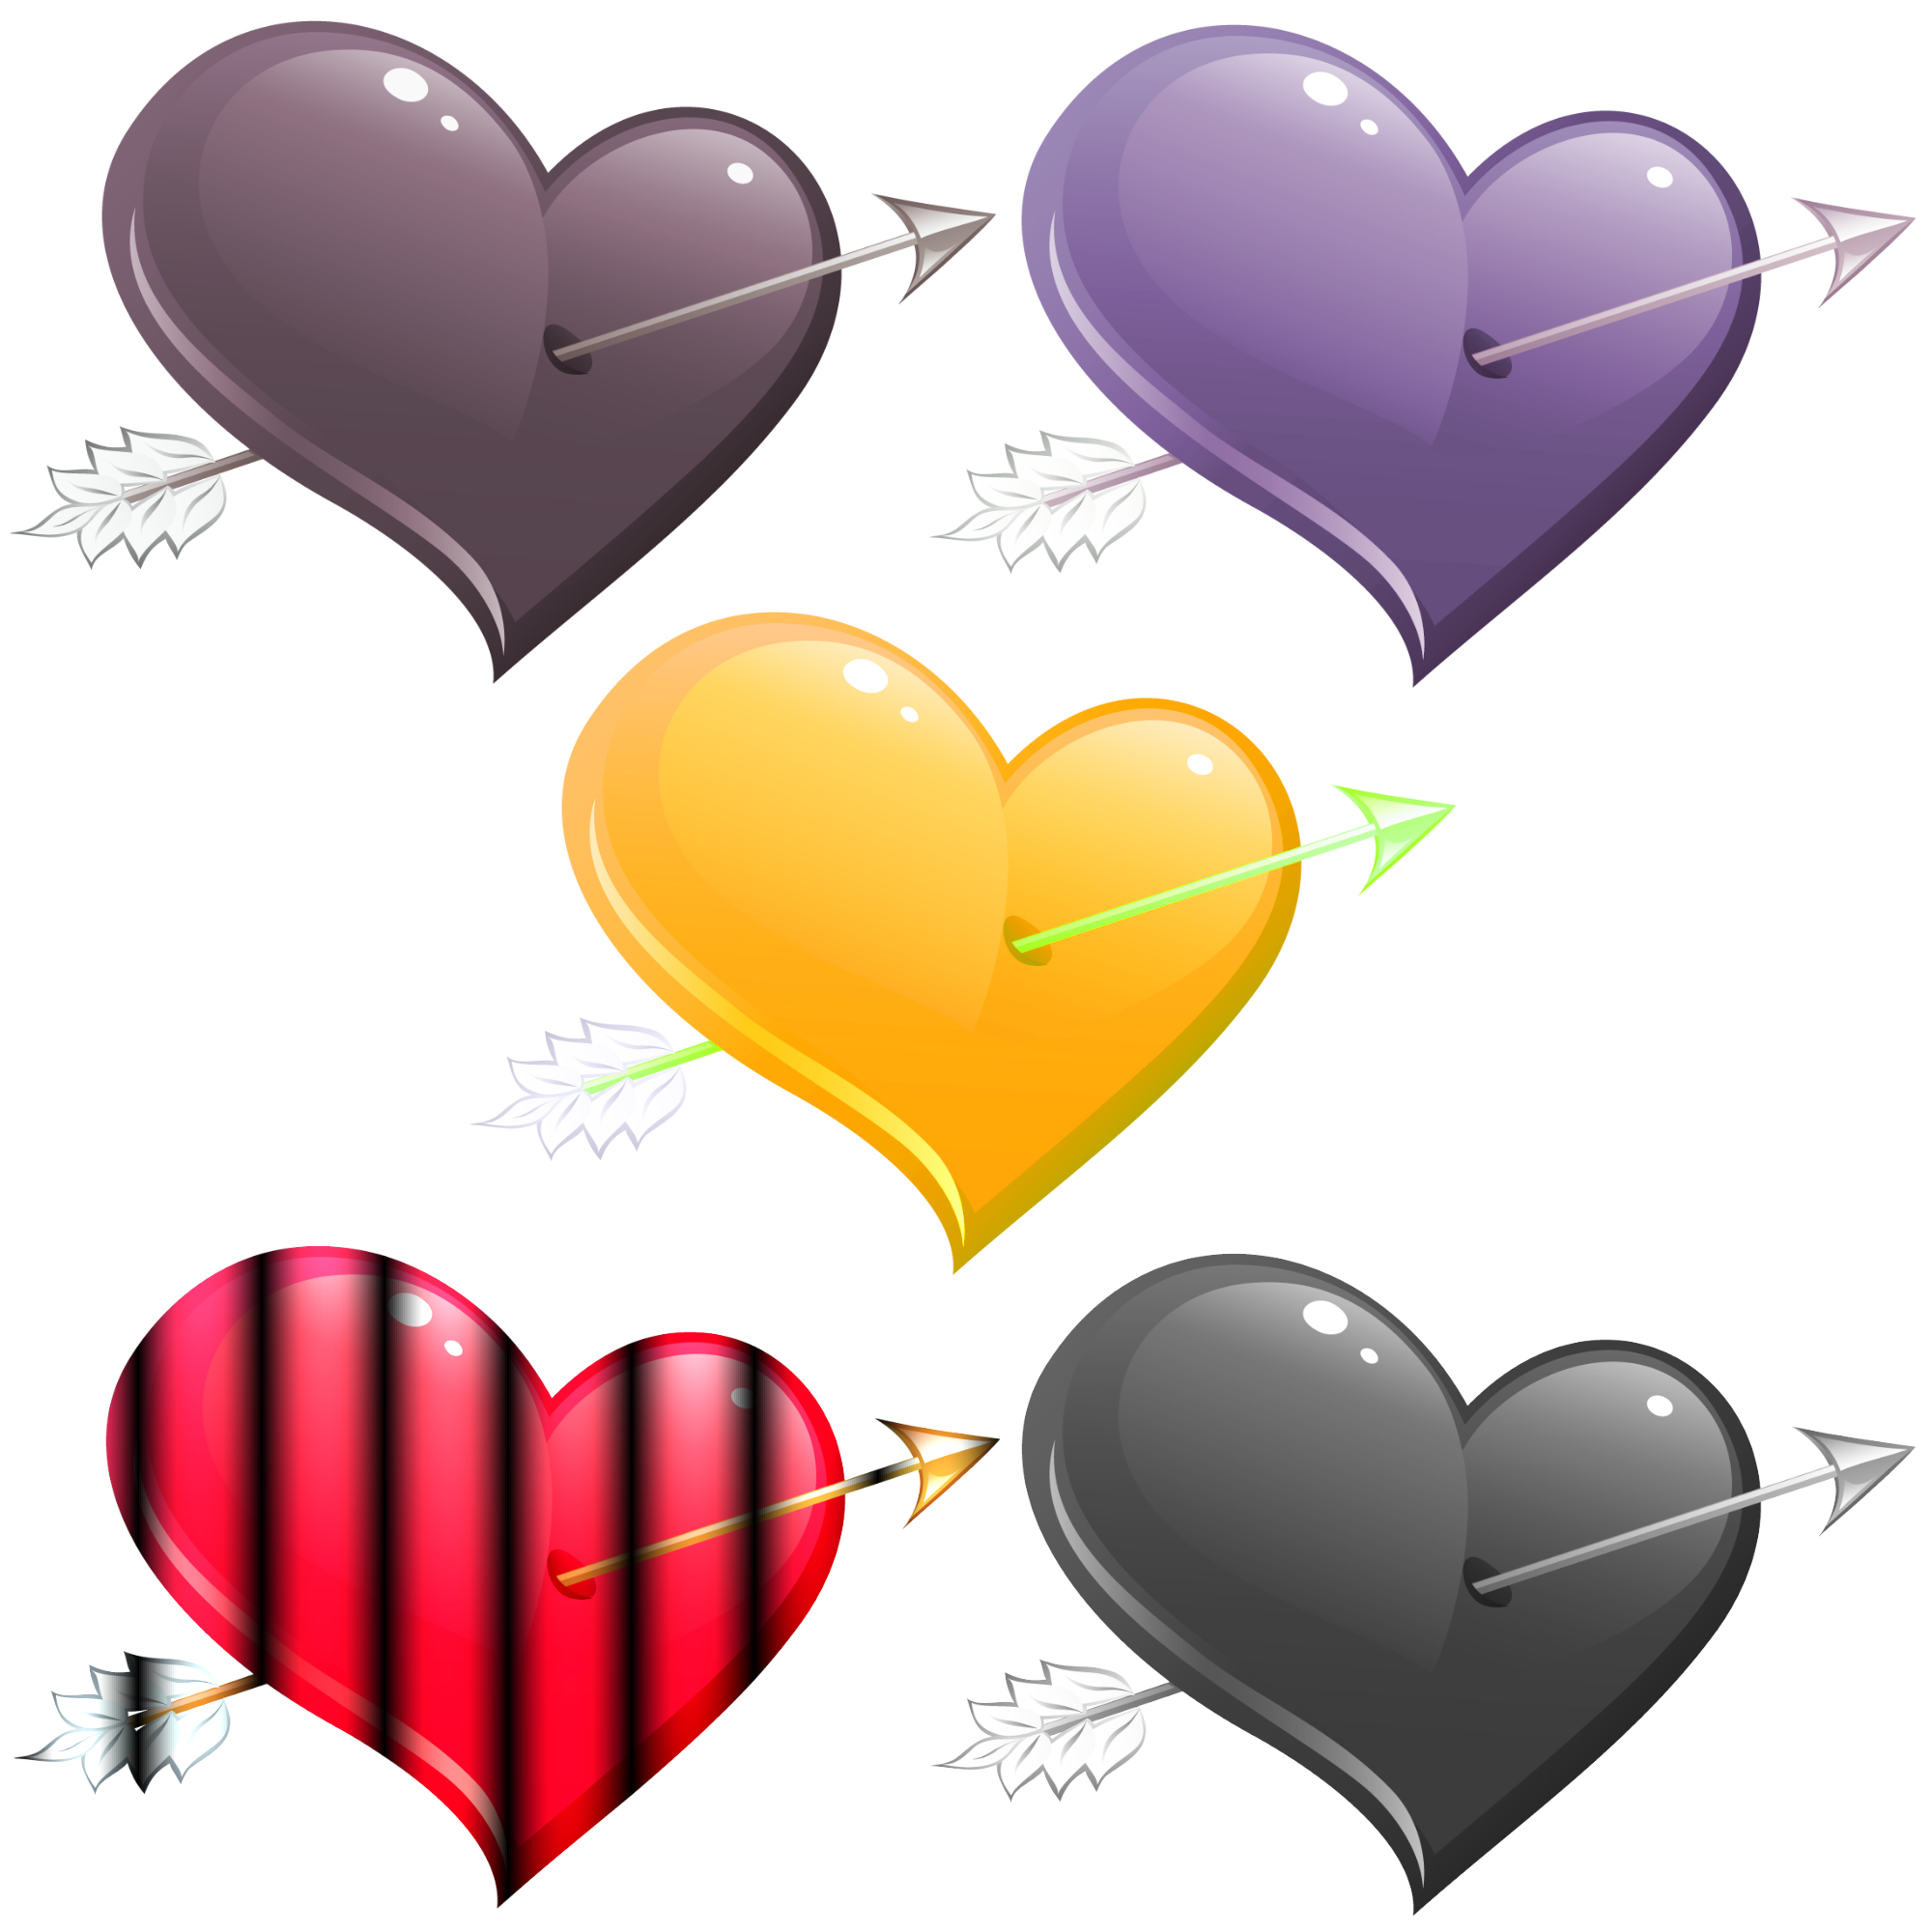 Pinterest and. Infinity clipart heart